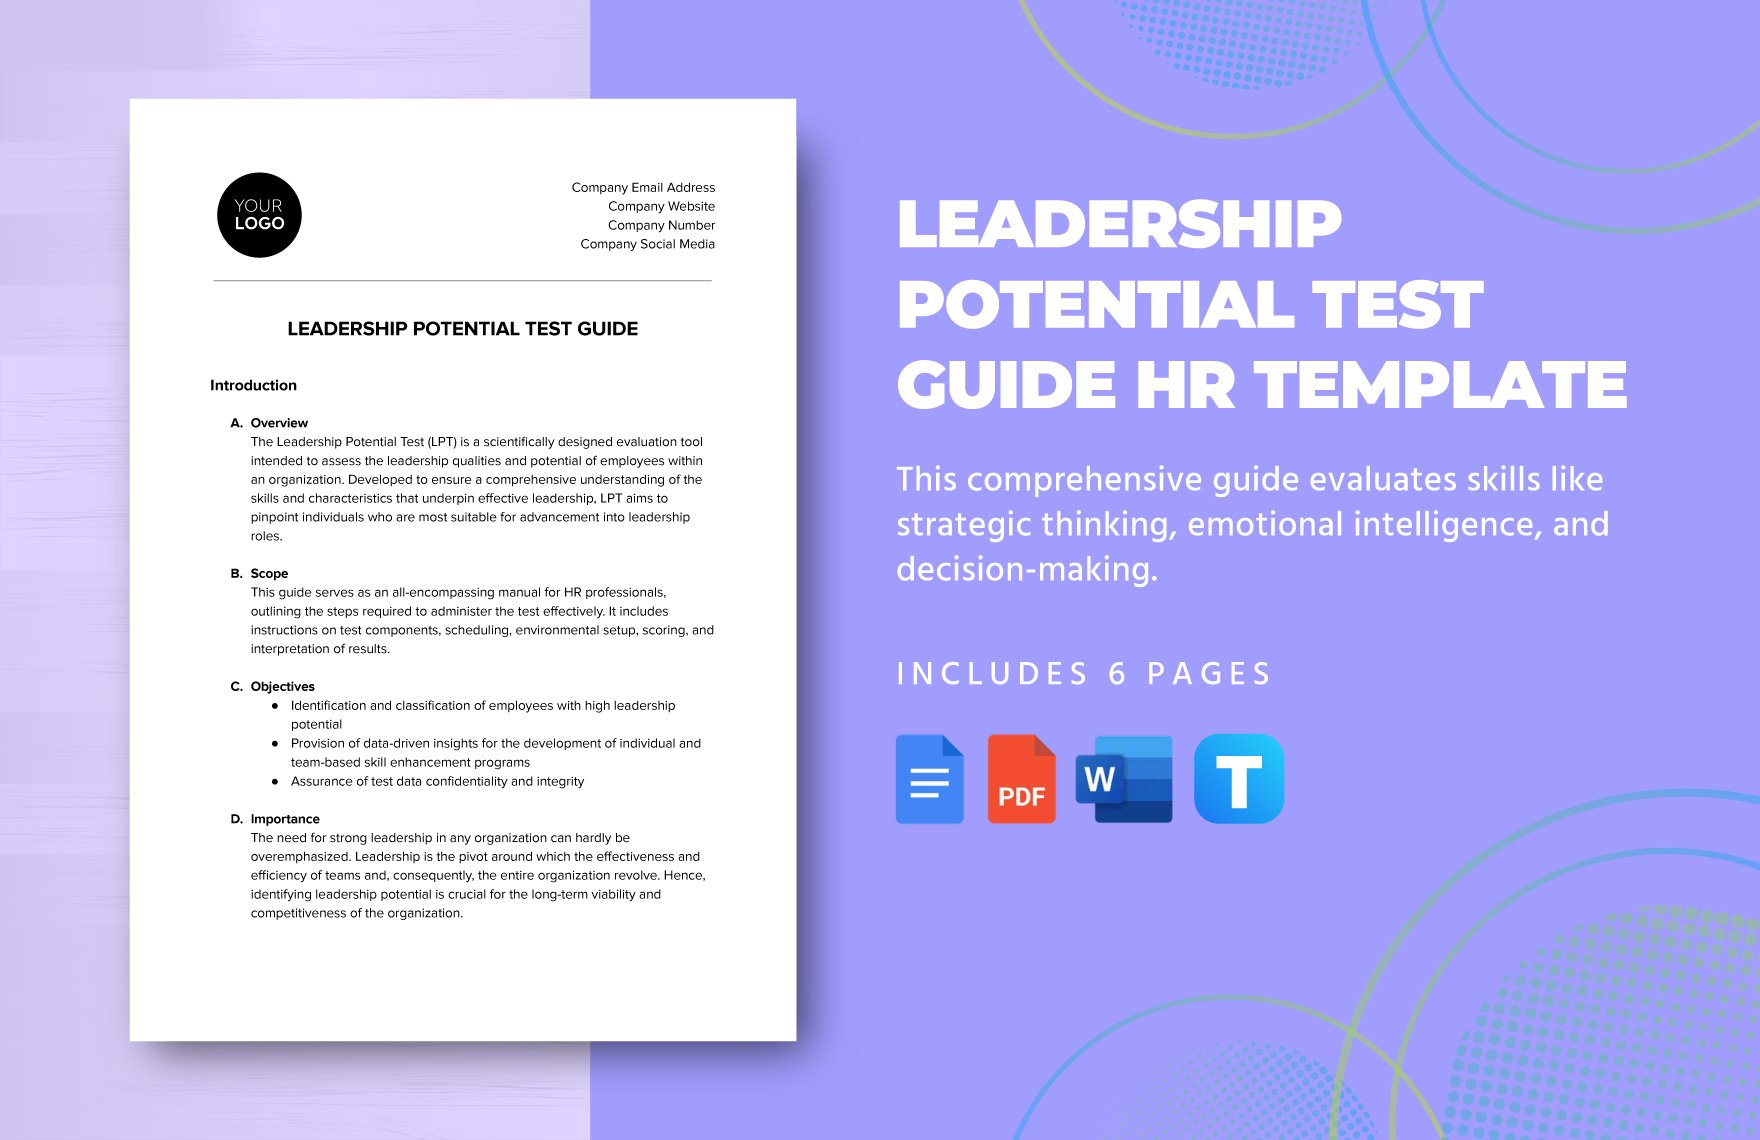 Leadership Potential Test Guide HR Template